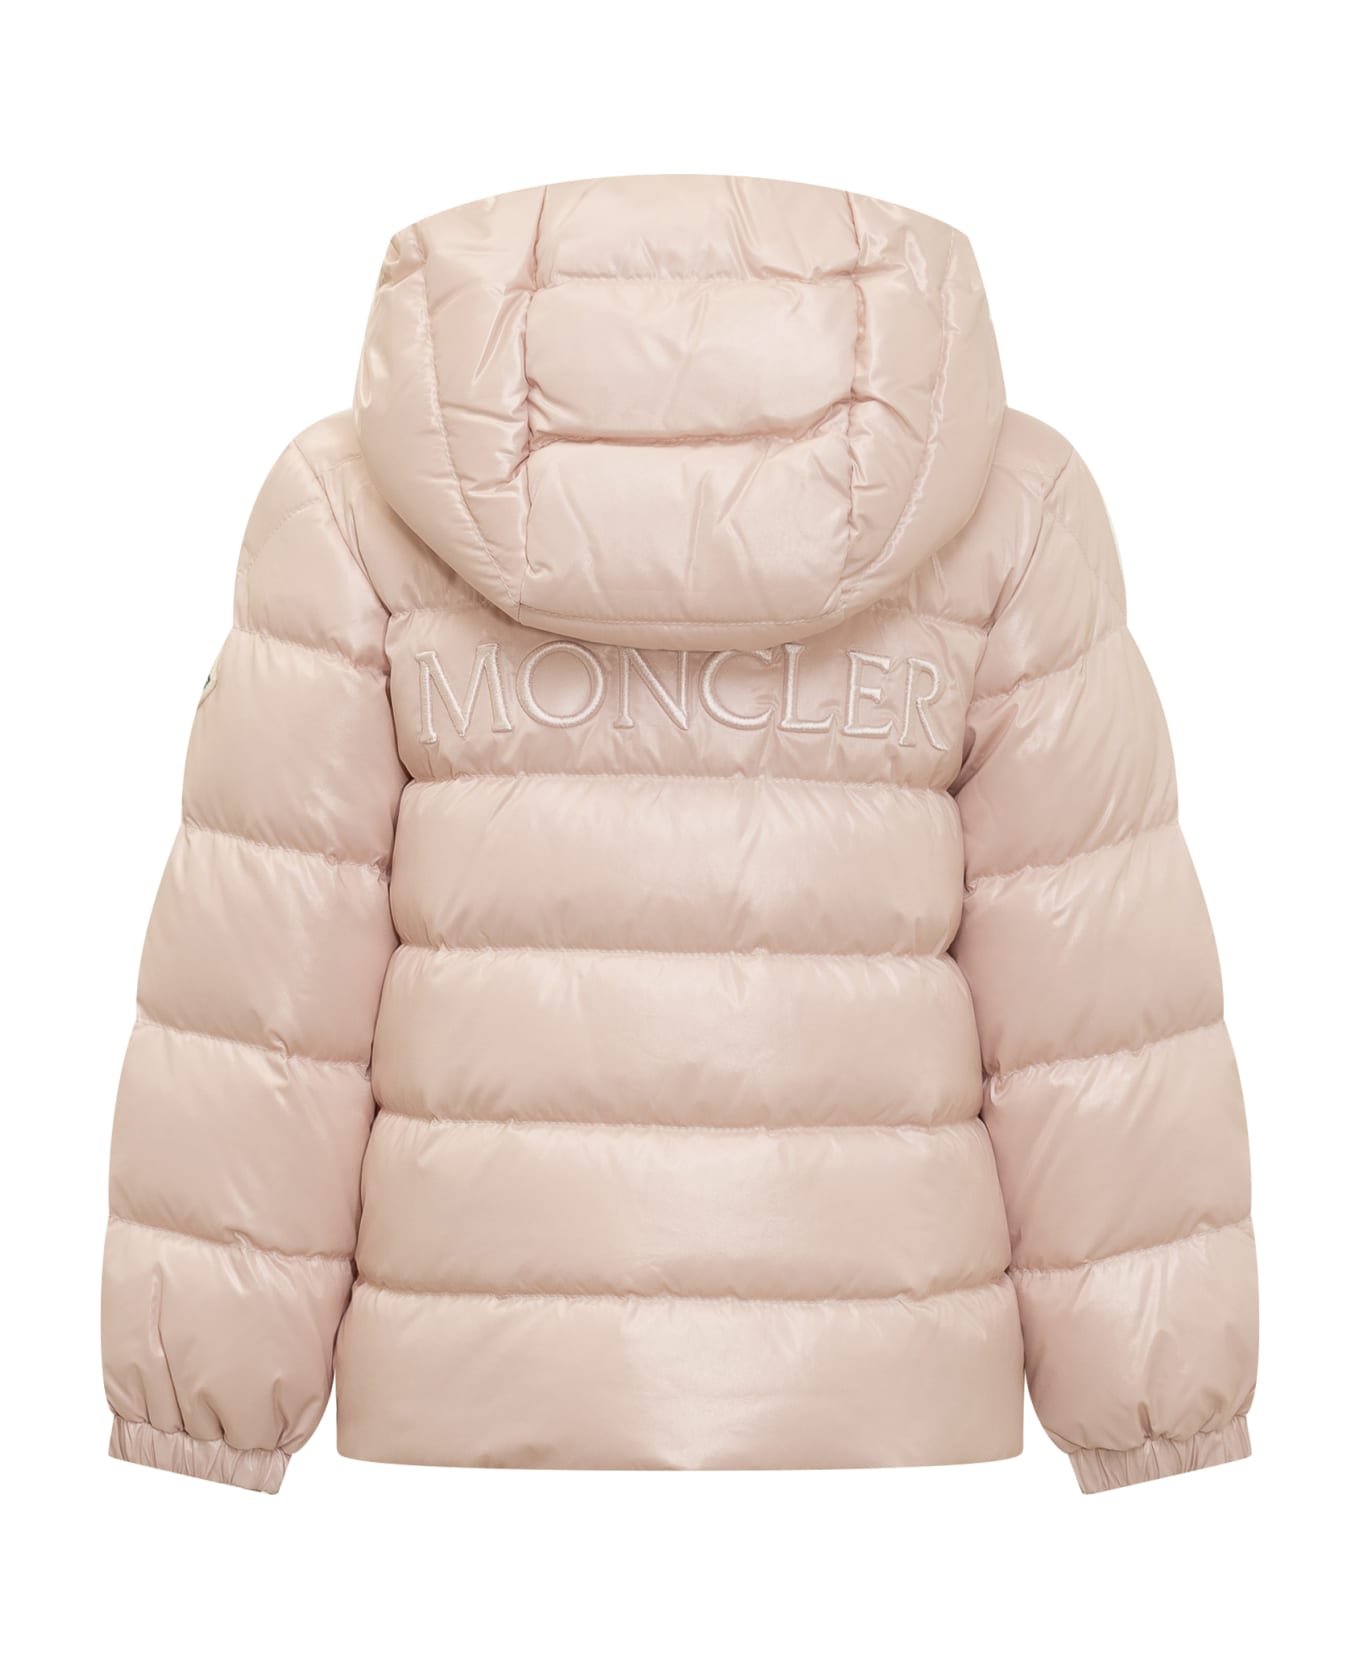 Moncler Anand Down Jacket - ROSA